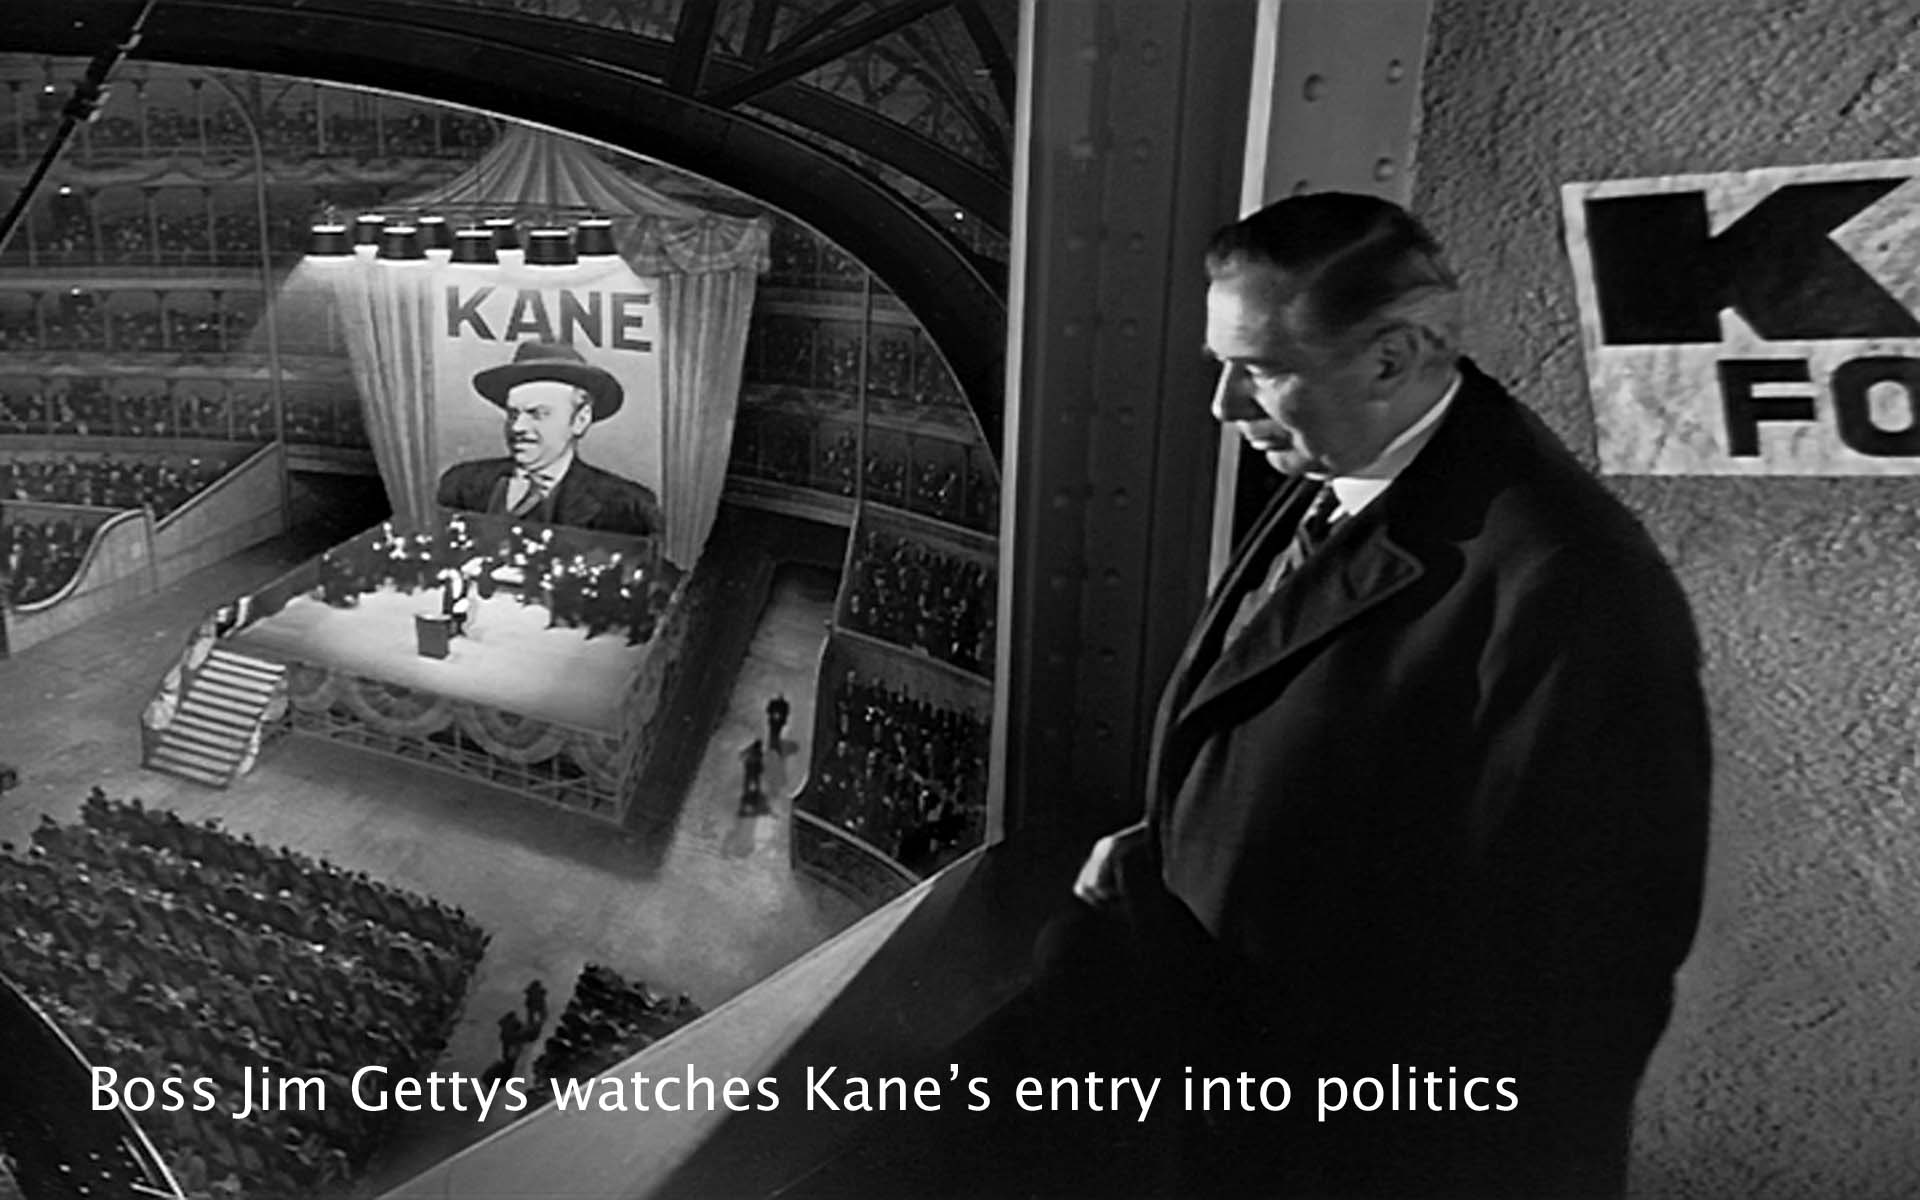 Boss Jim Gettys watches Kane's entry into politics